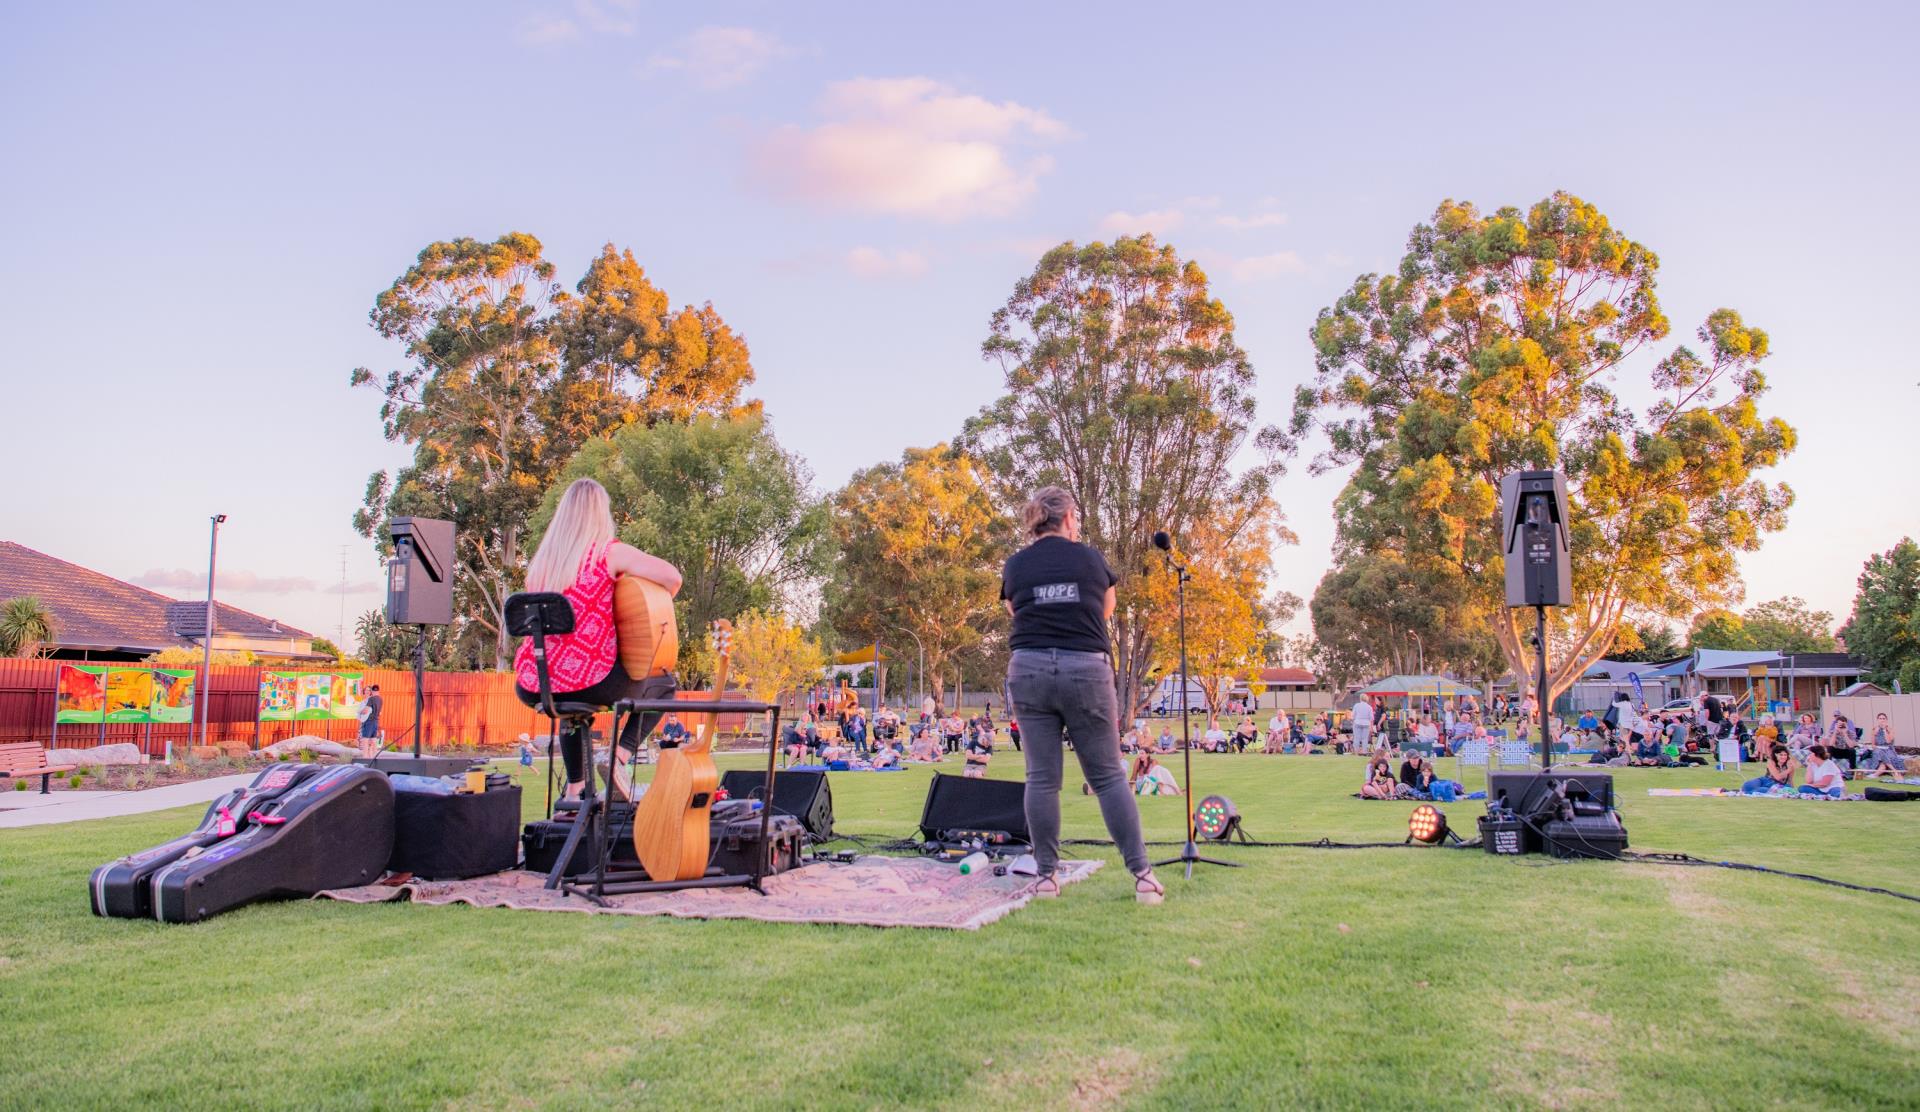 Summer Sounds is back with free live music